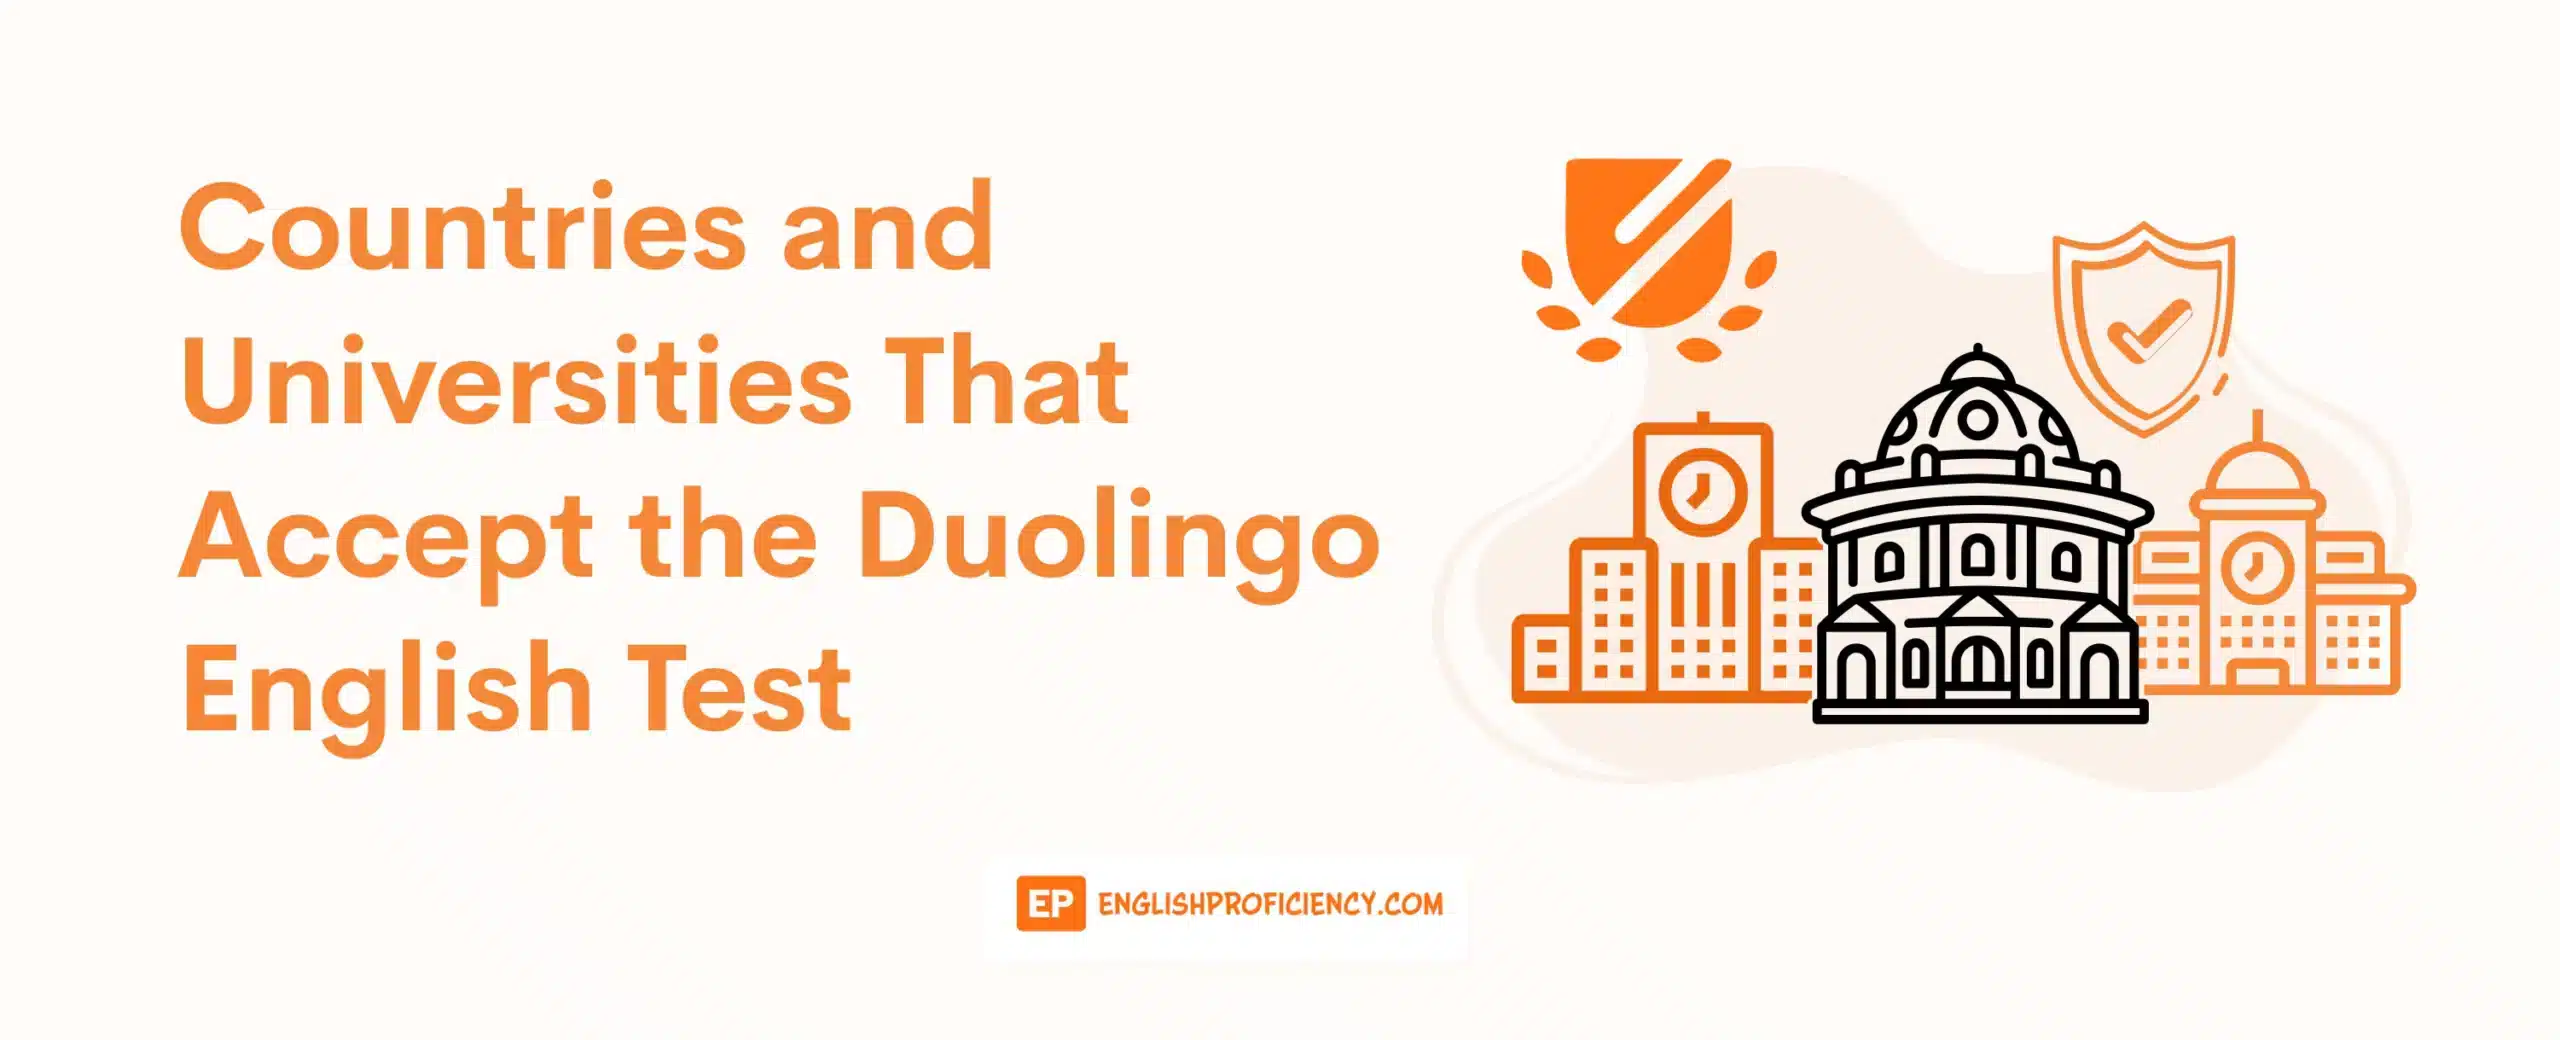 Countries and Universities That Accept the Duolingo English Test